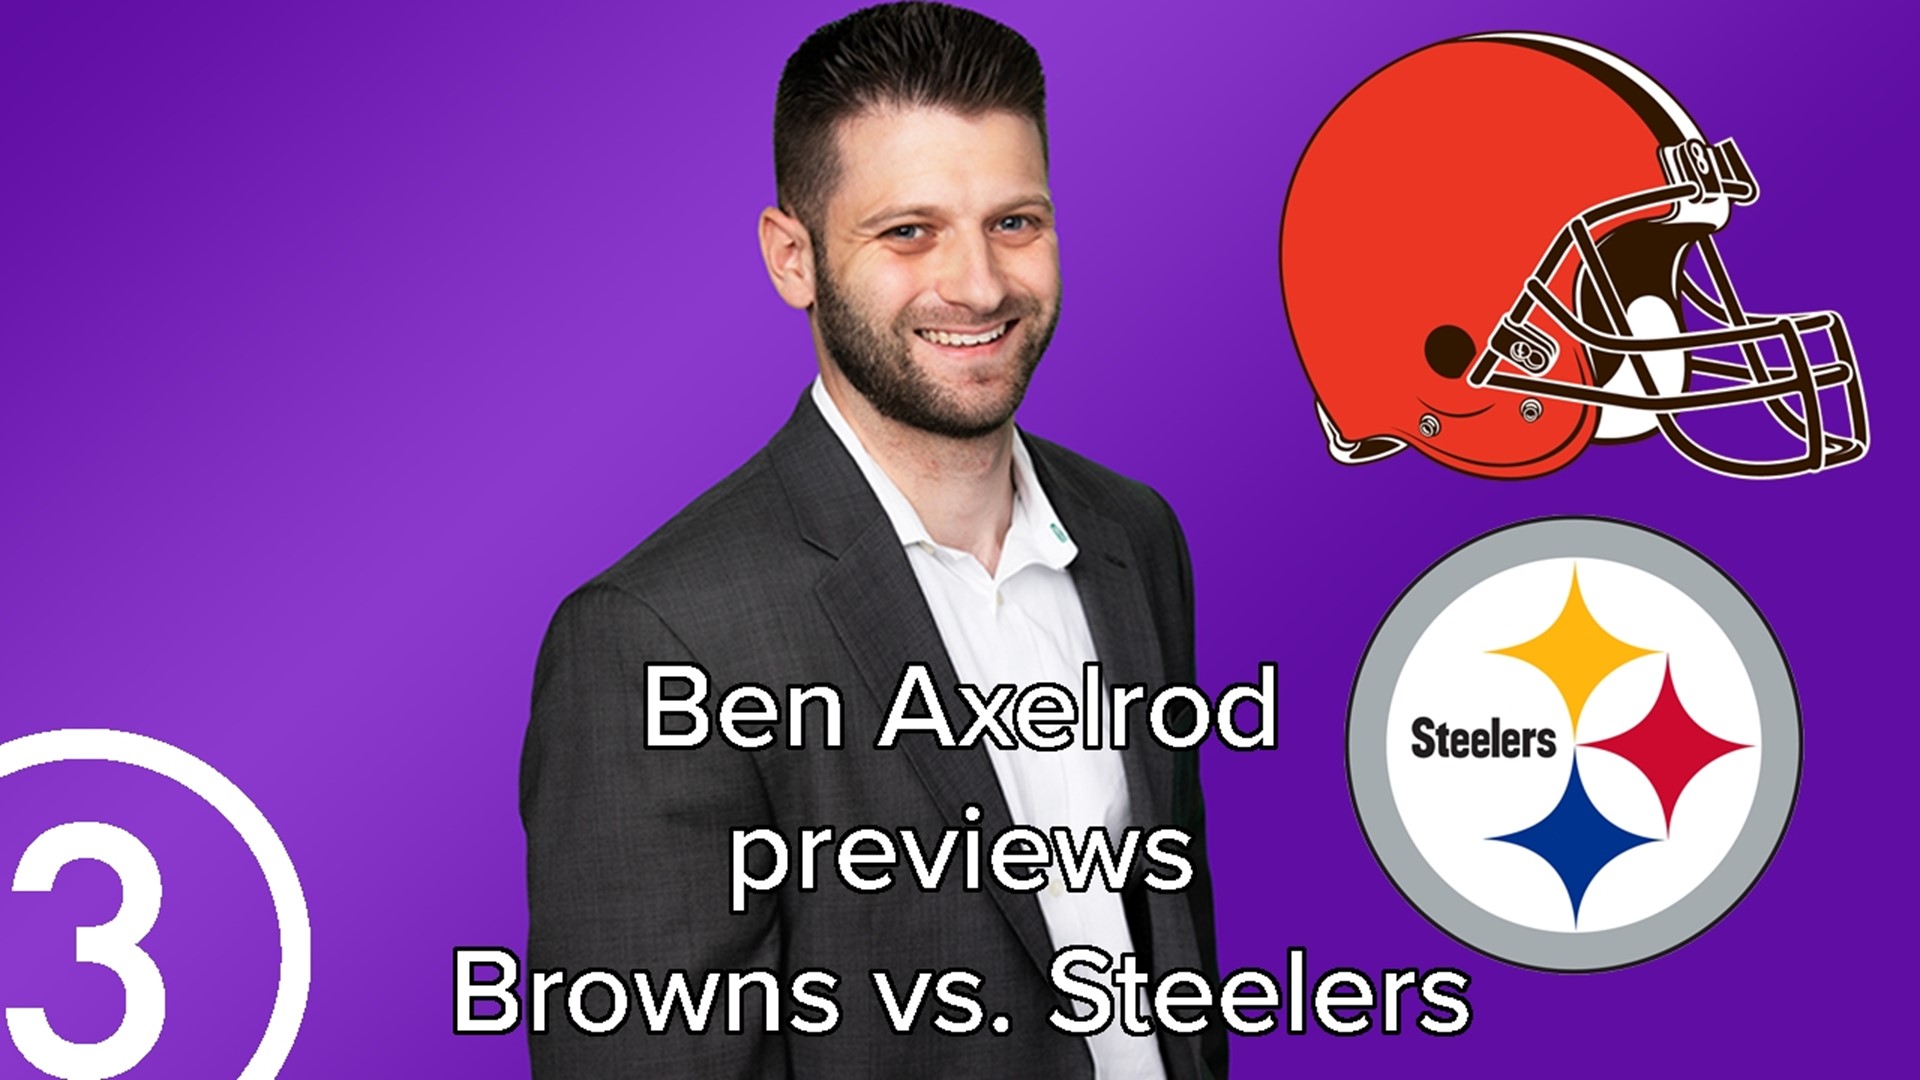 WATCH: The Match Up - Steelers vs. Browns